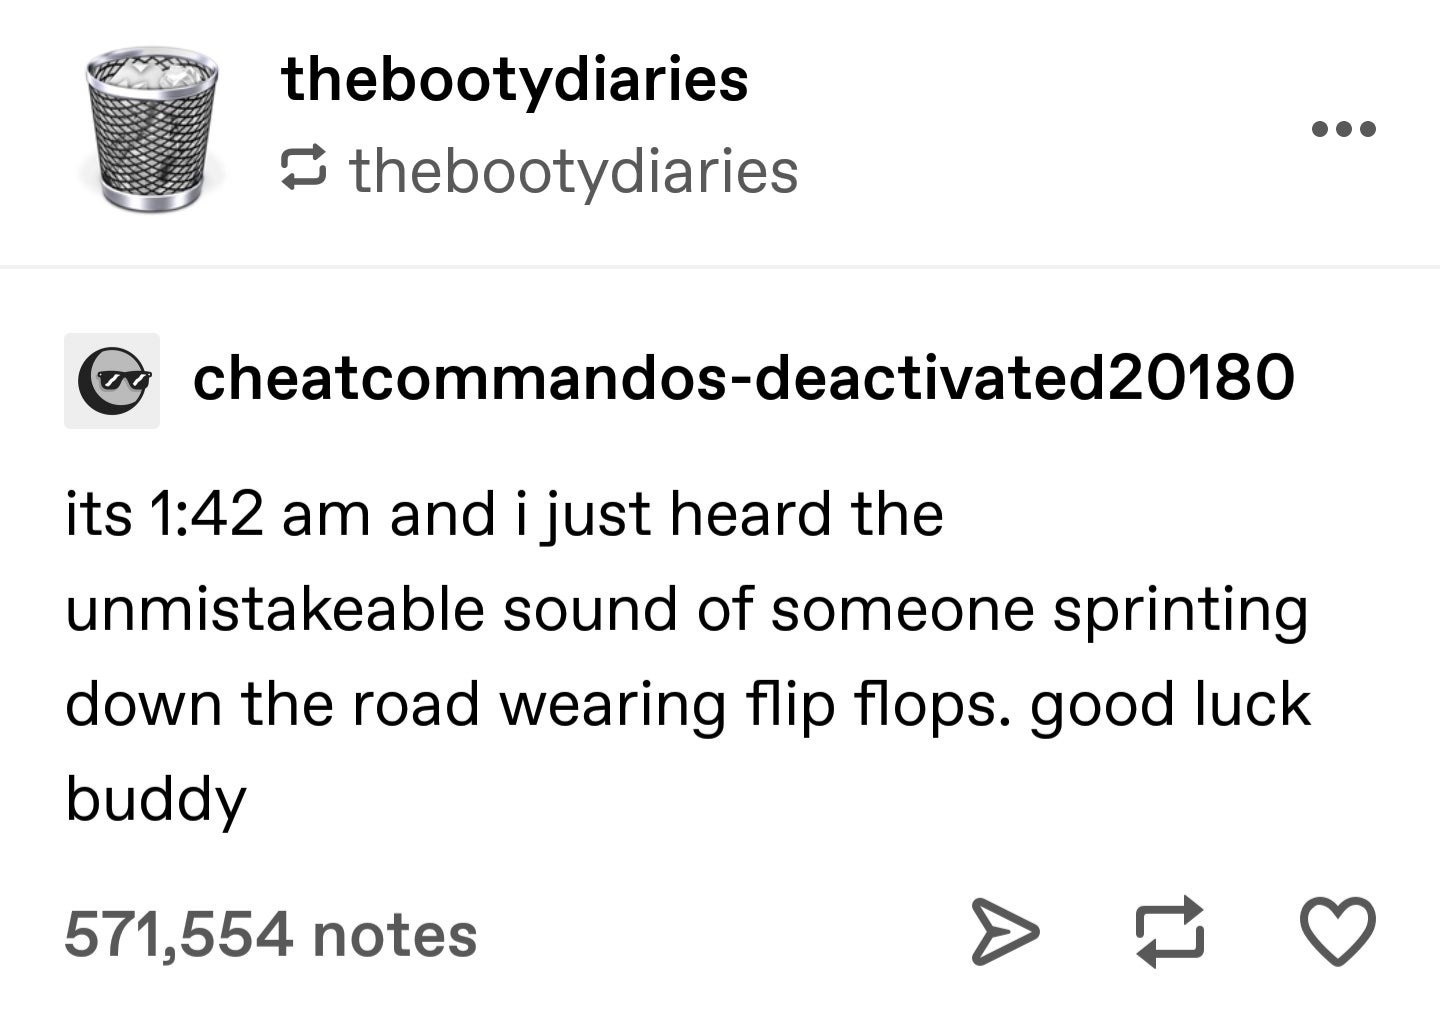 angle - thebootydiaries thebootydiaries eng cheatcommandosdeactivated20180 its and i just heard the unmistakeable sound of someone sprinting down the road wearing flip flops. good luck buddy 571,554 notes